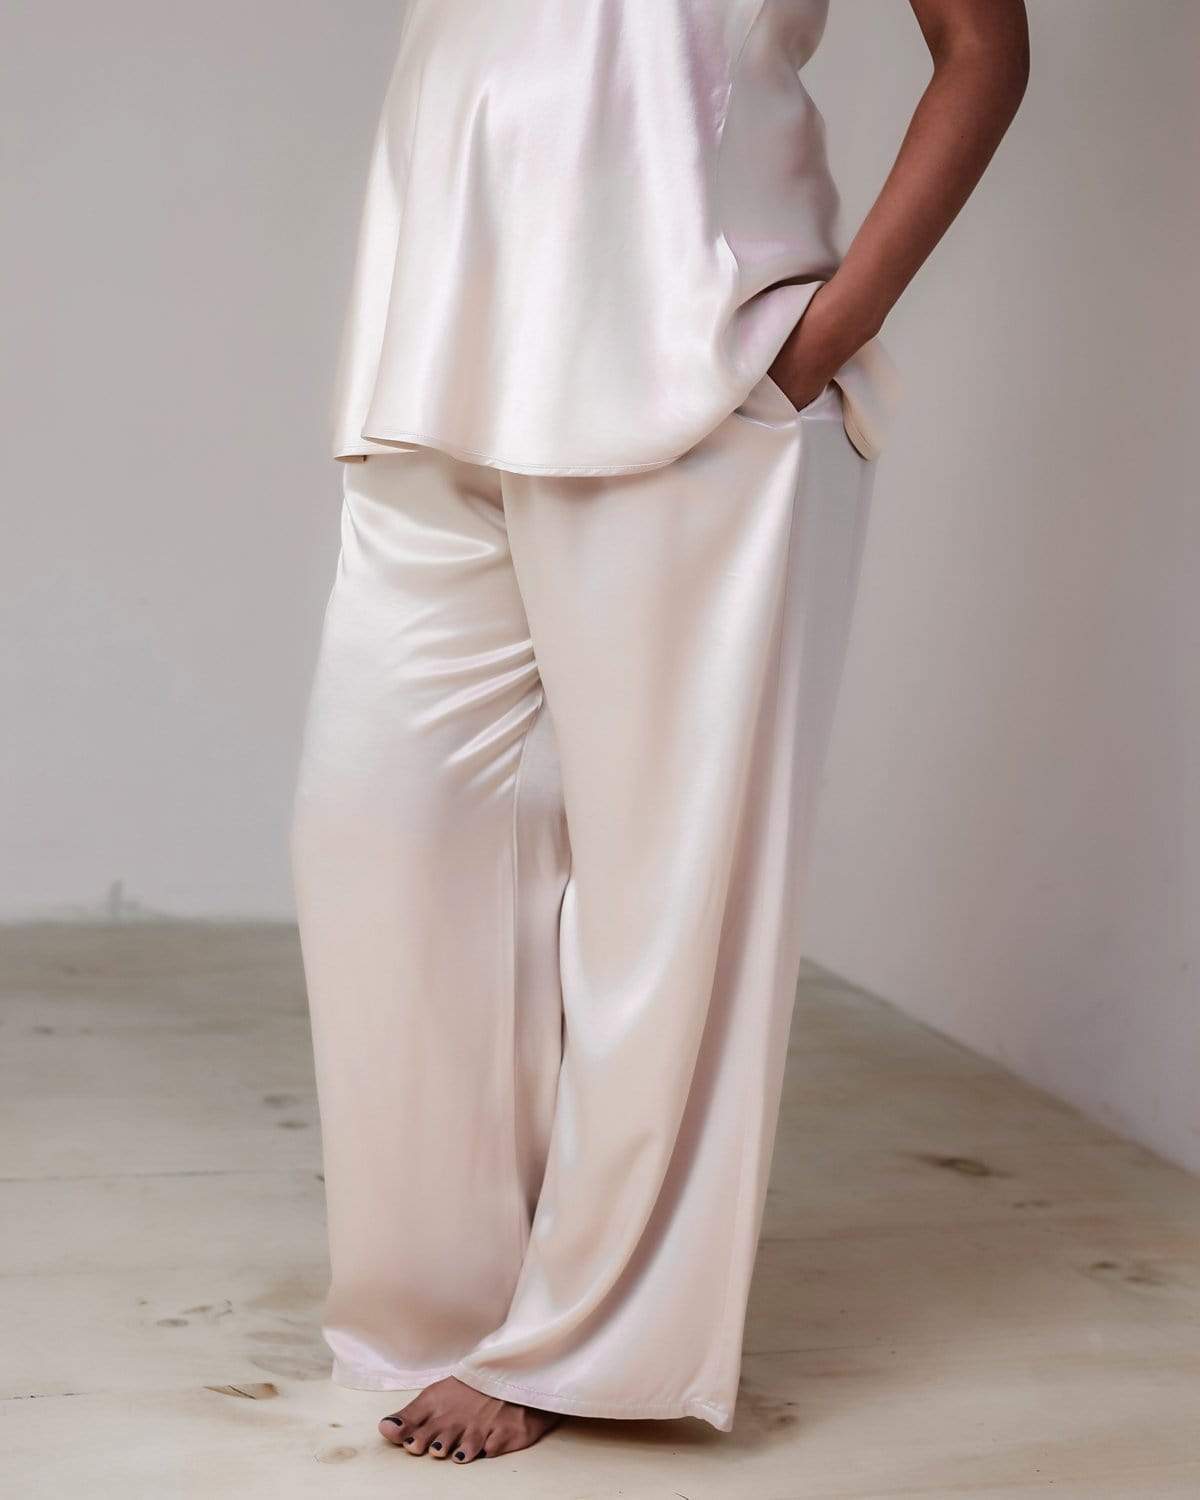 Best Satin Lounge Pants for Women Are From PJ Harlow